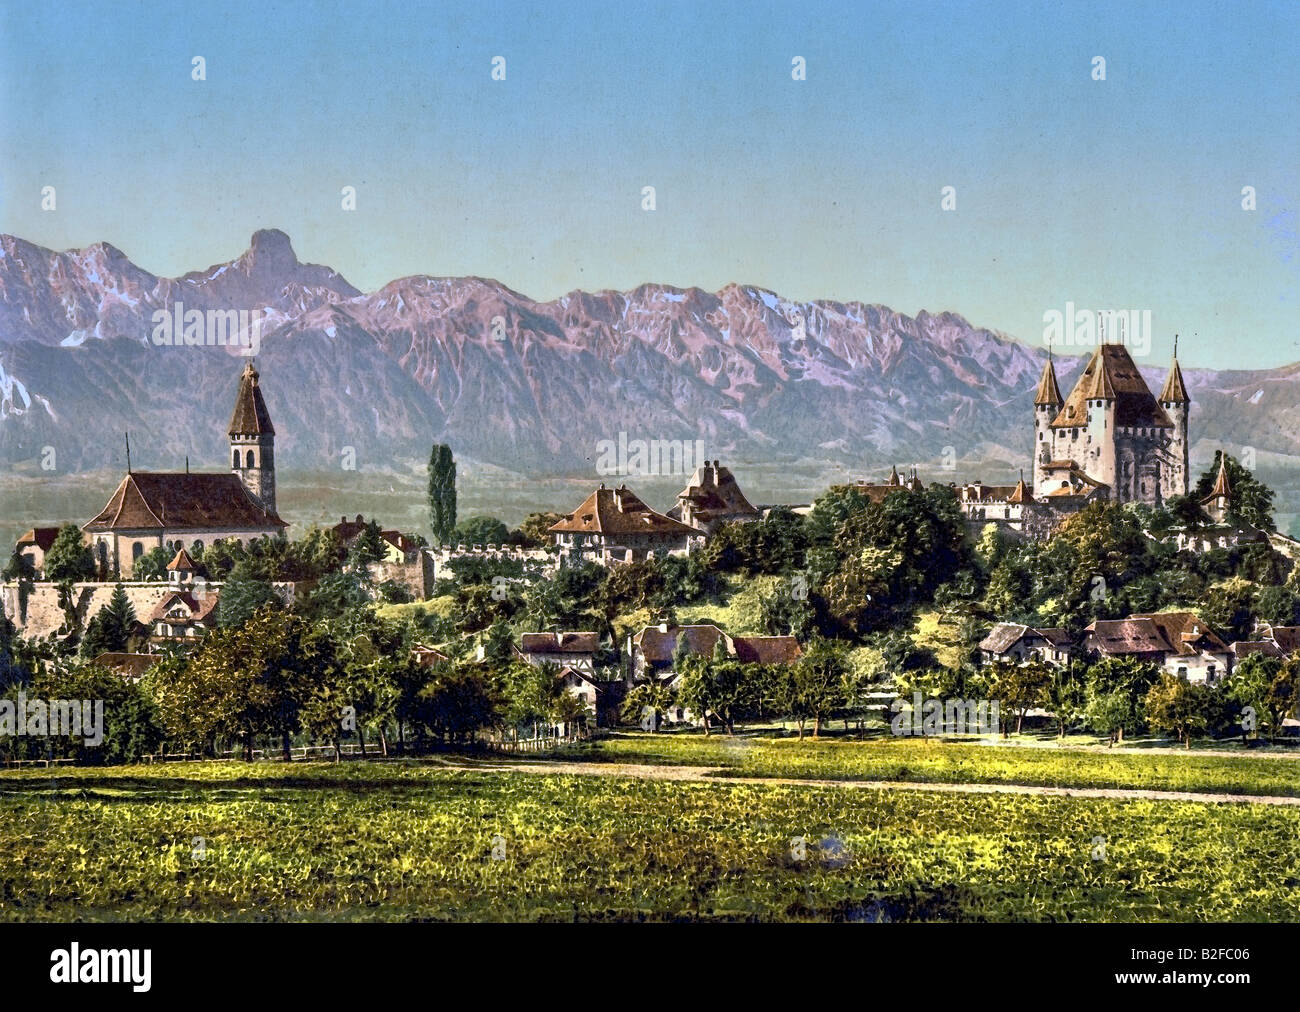 View of the City of Thun with the church and Thun Castle, Mount Stockhorn in the back. Stock Photo